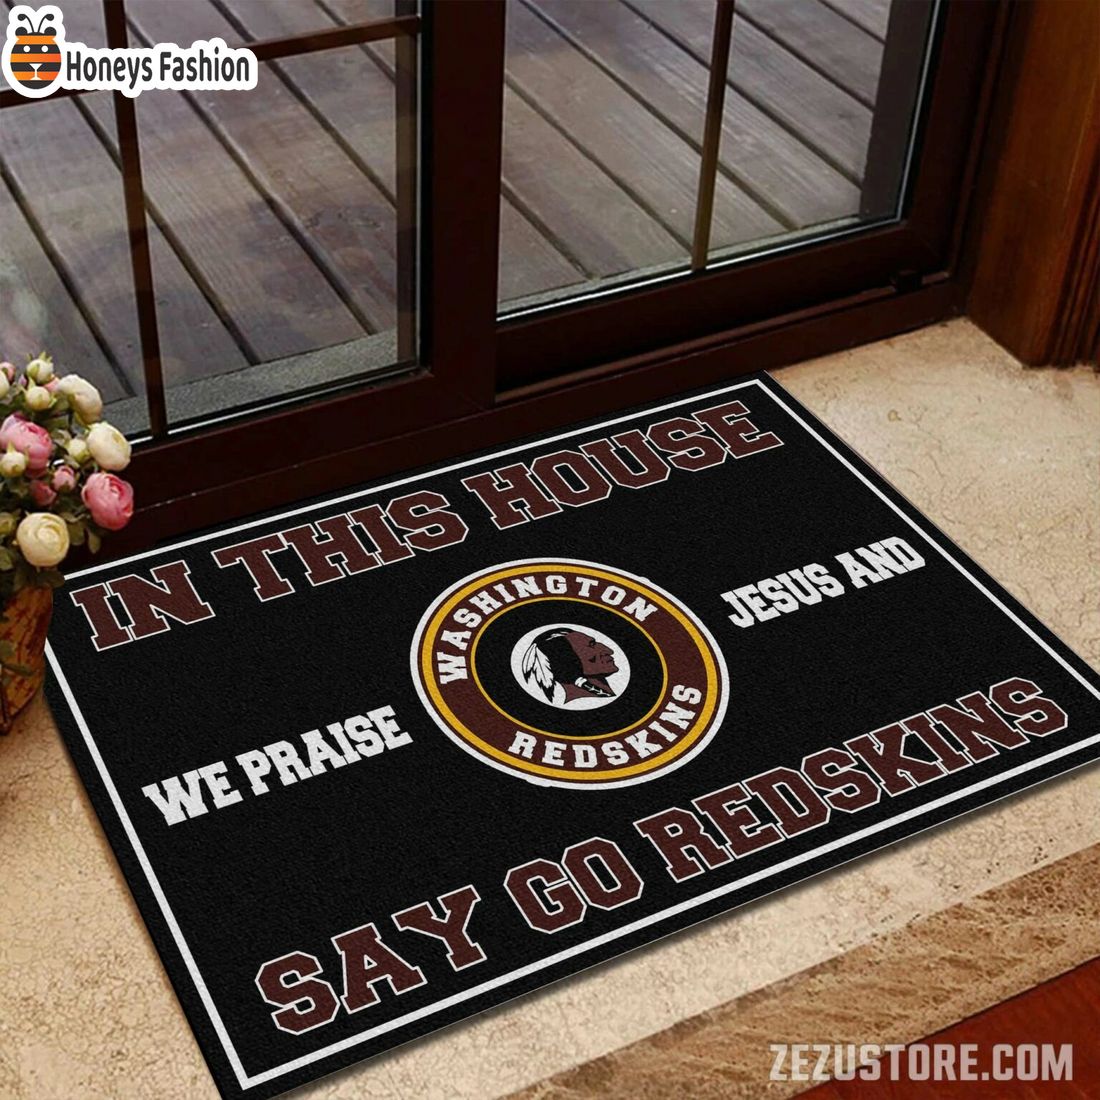 In this house we praise jesus and say go Redskins doormat